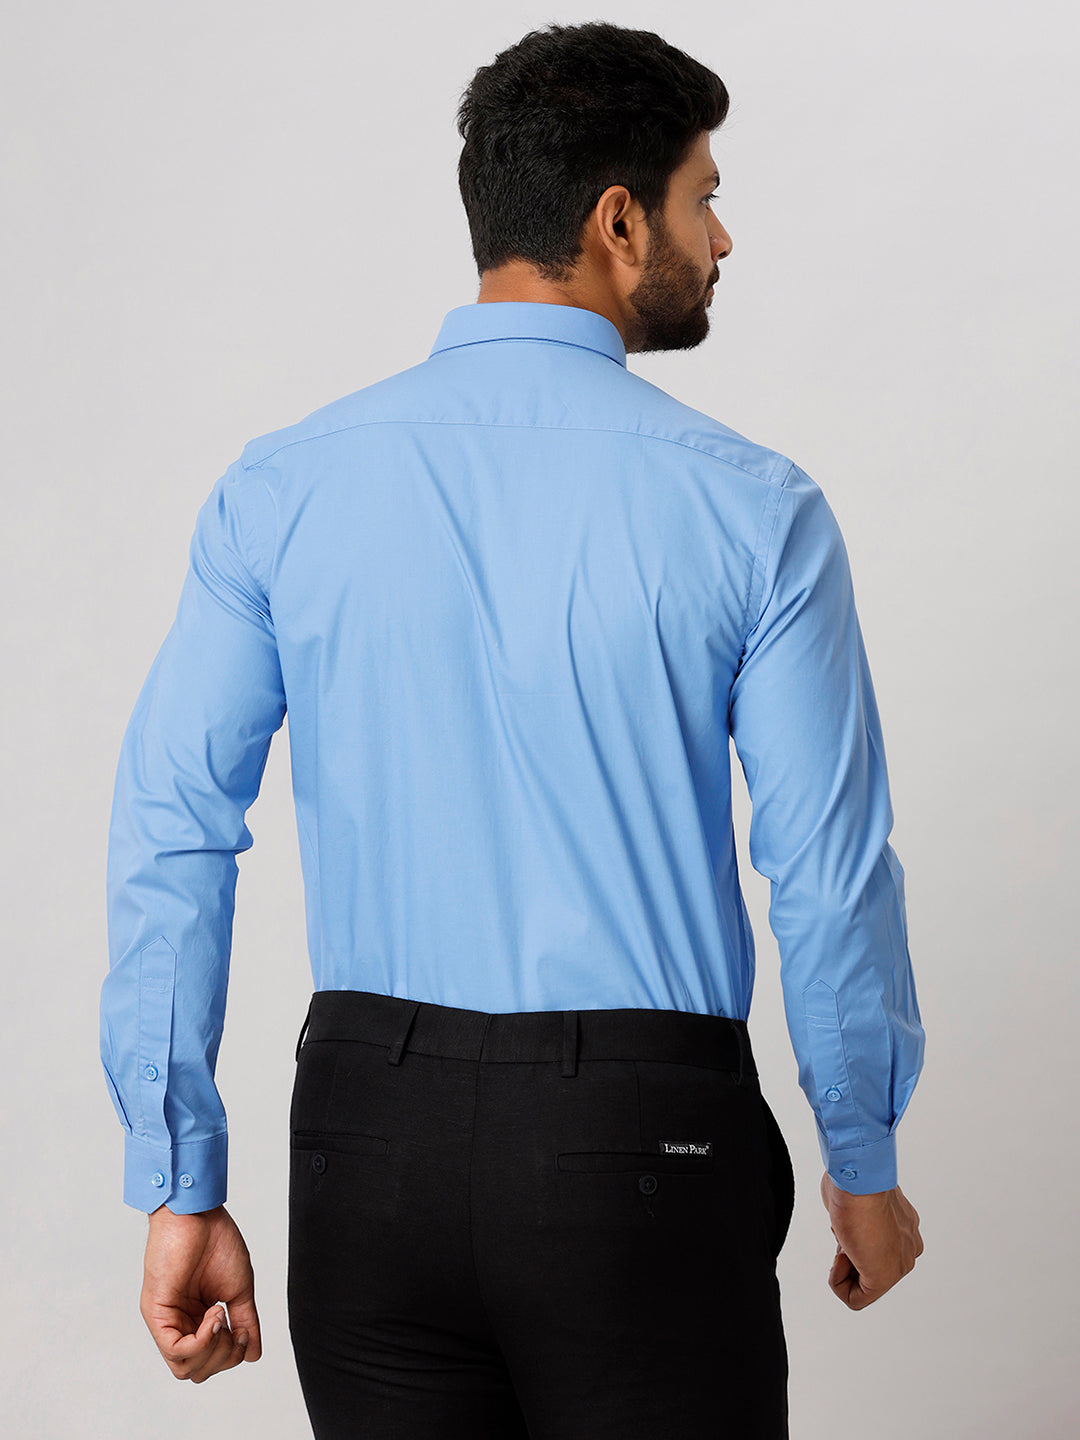 Mens Formal Cotton Spandex 2 Way Stretch Blue Full Sleeves Shirt LY8-Back view